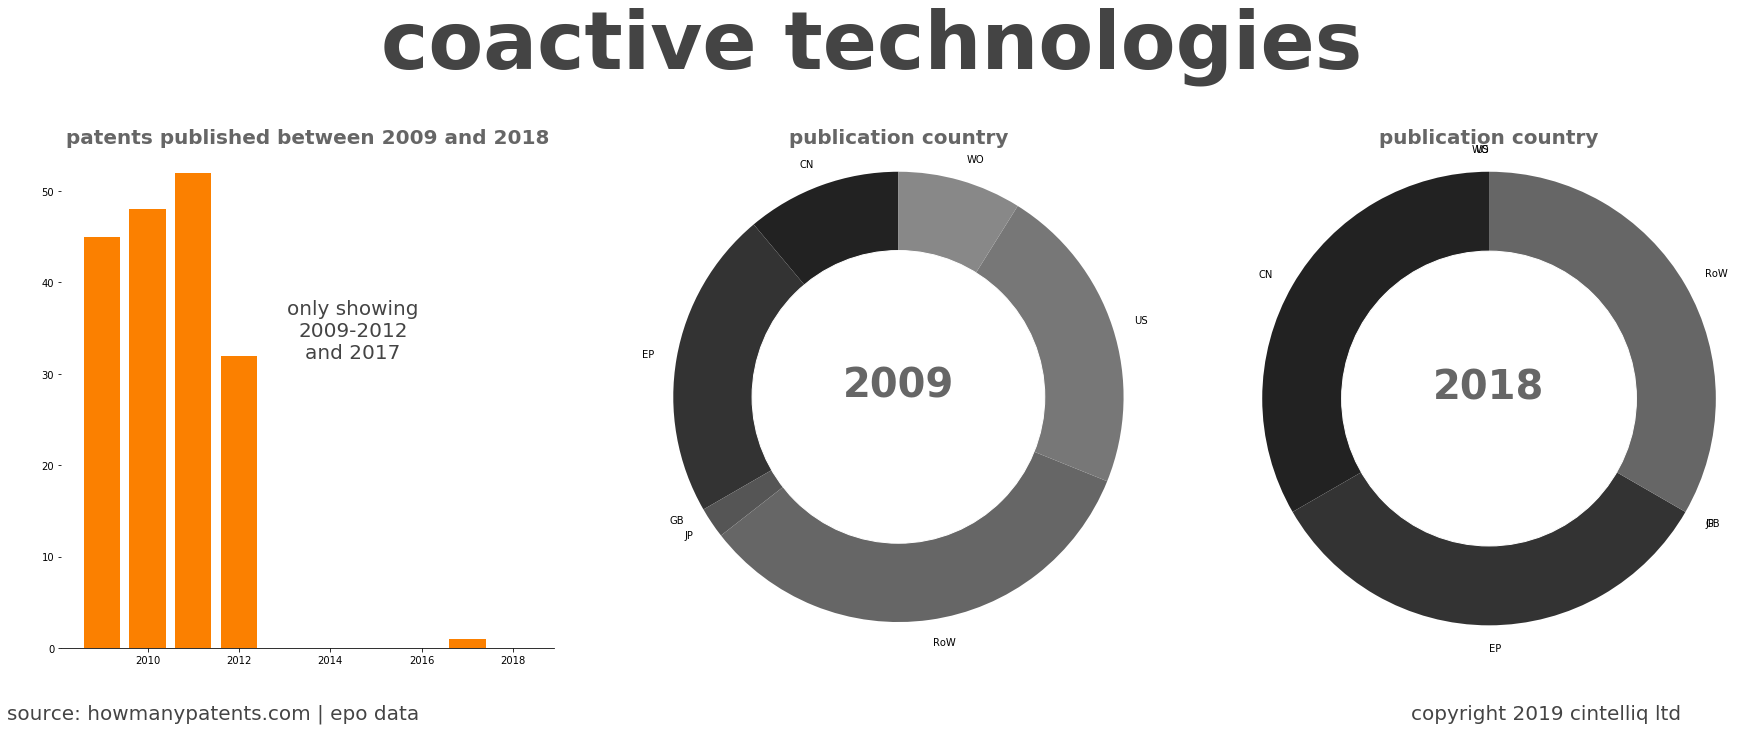 summary of patents for Coactive Technologies